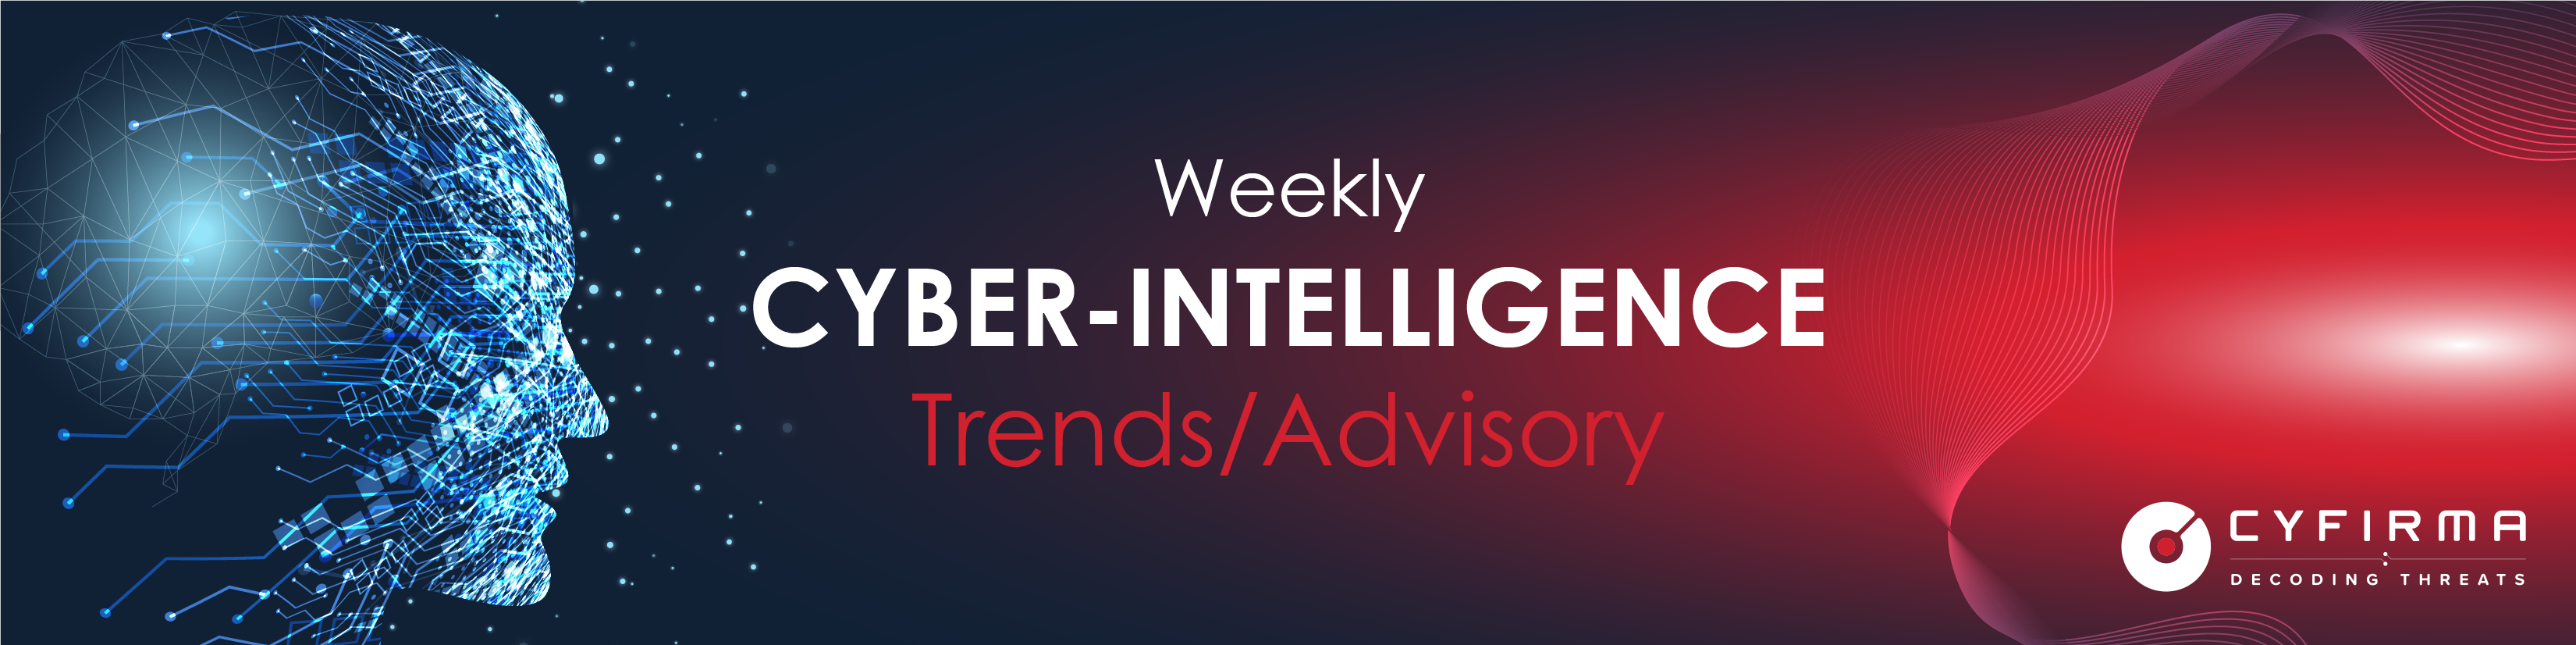 Weekly Intelligence Trends and Advisory | Threat Actor in Focus | Rise in Malware, Ransomware, Phishing | Vulnerability and Exploits – 4 Feb 2022